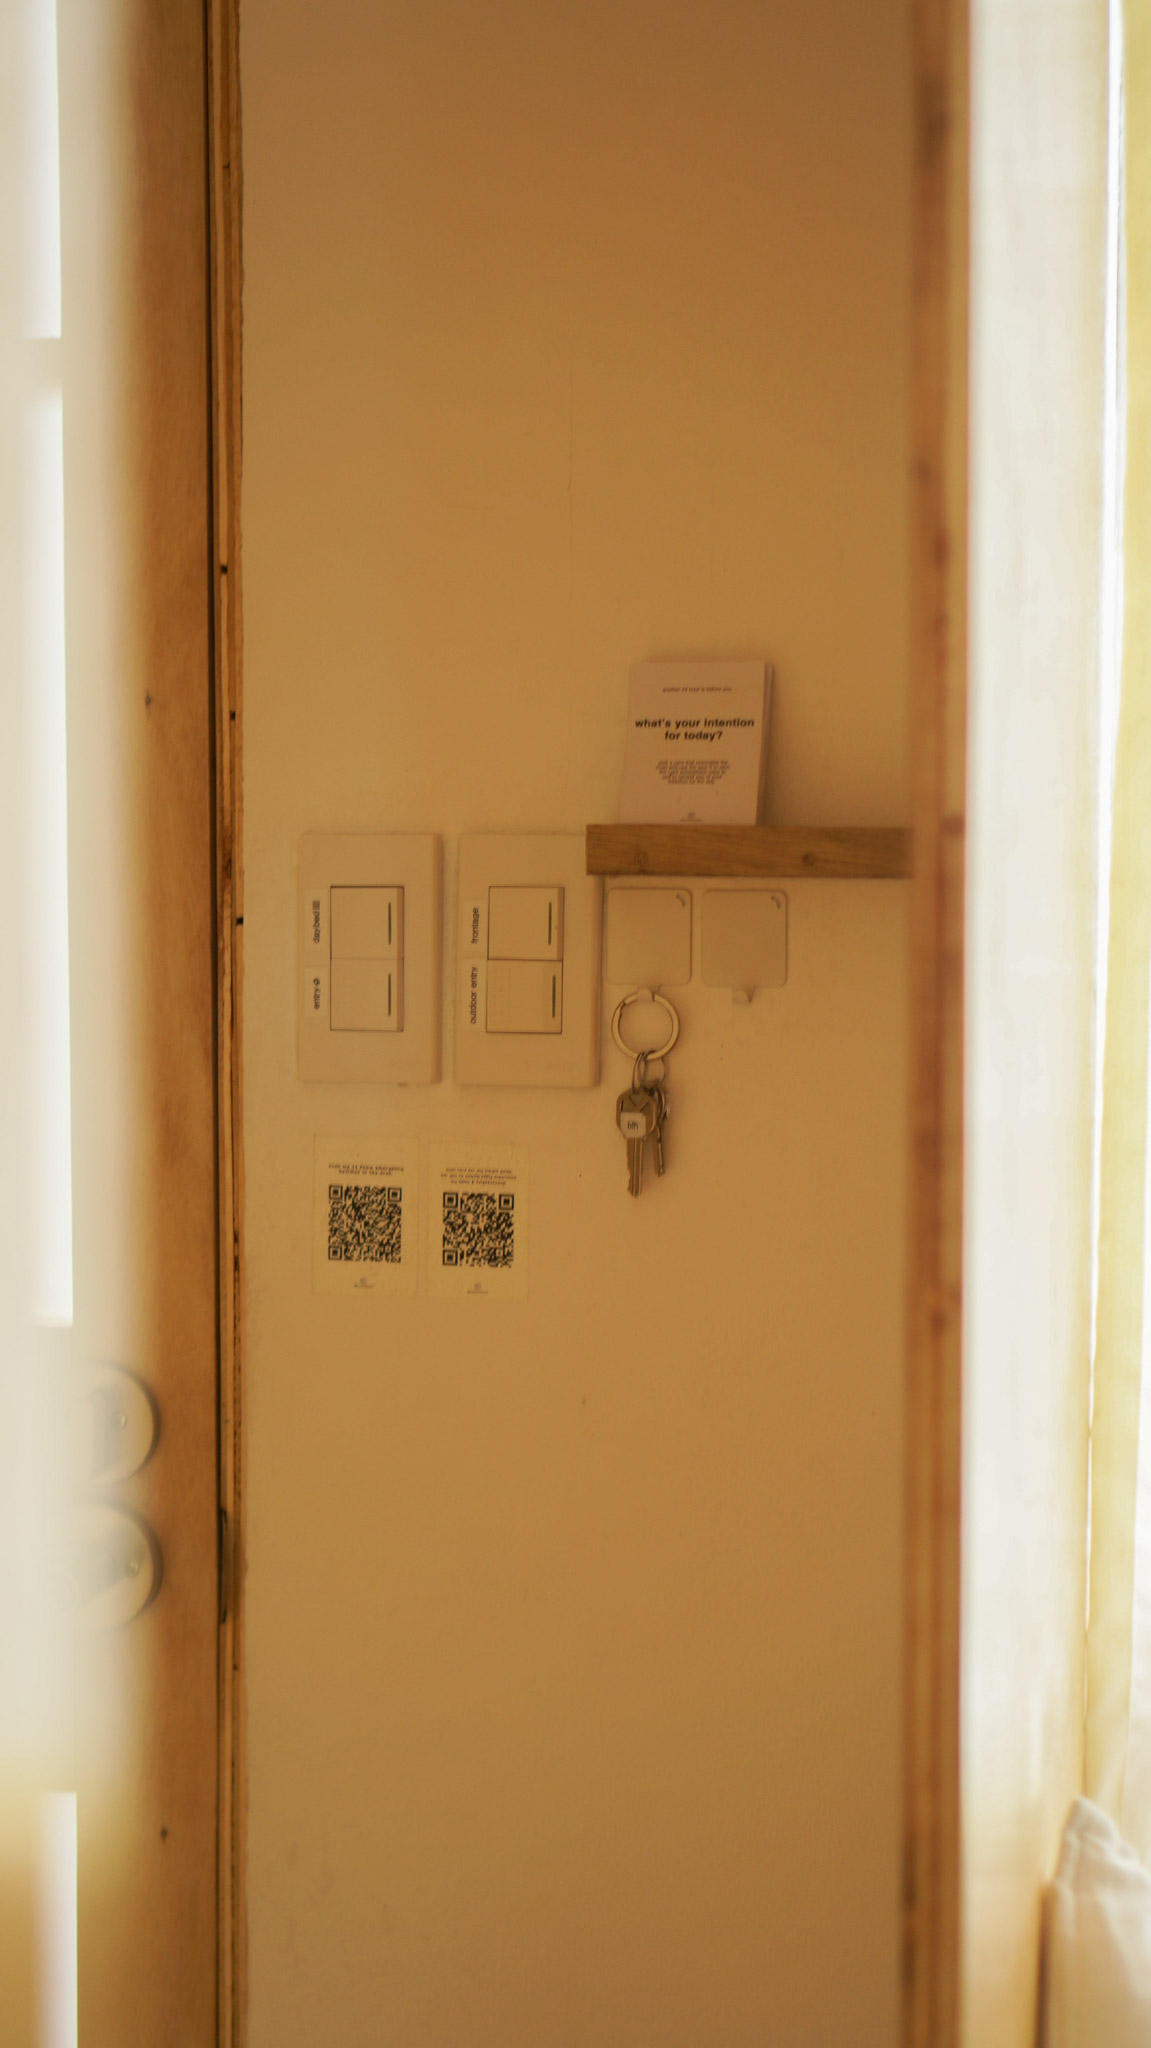 A small nook in an entryway with light sockets, hooks for keys, a small shelf, and QR codes inside a  small house design.